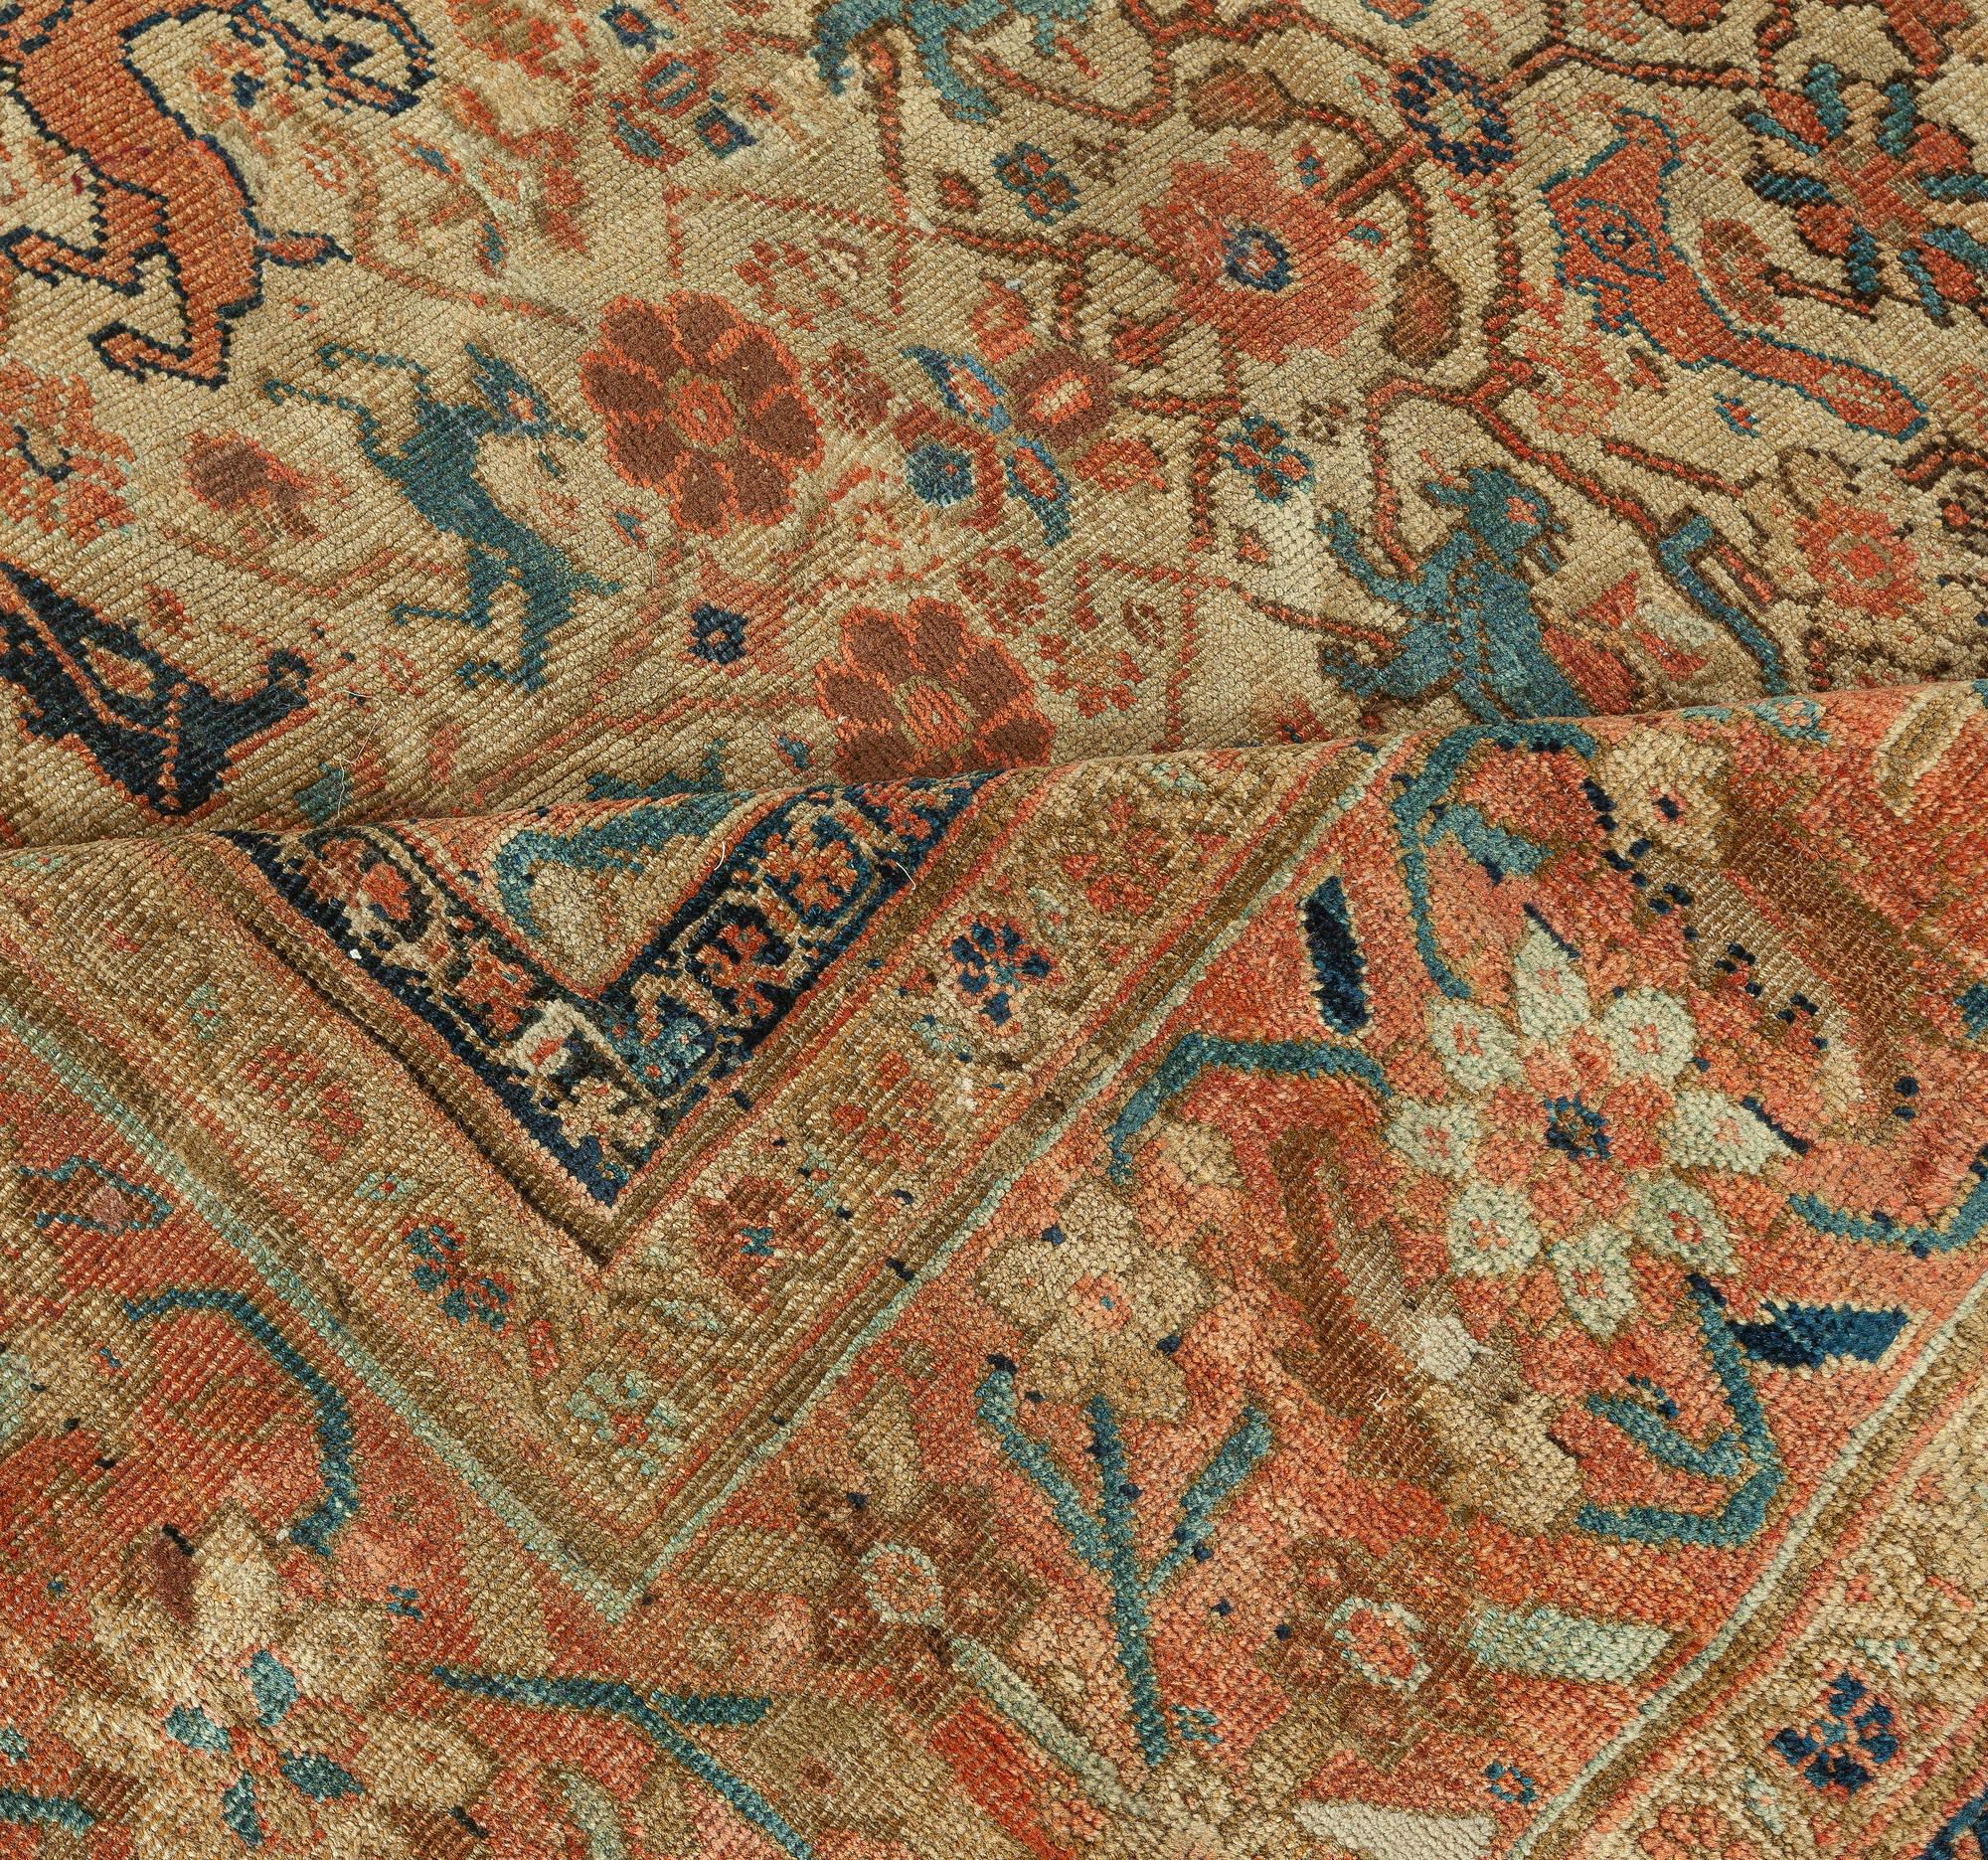 Late 19th century fine Persian Sultanabad Area rug
Size: 10'1